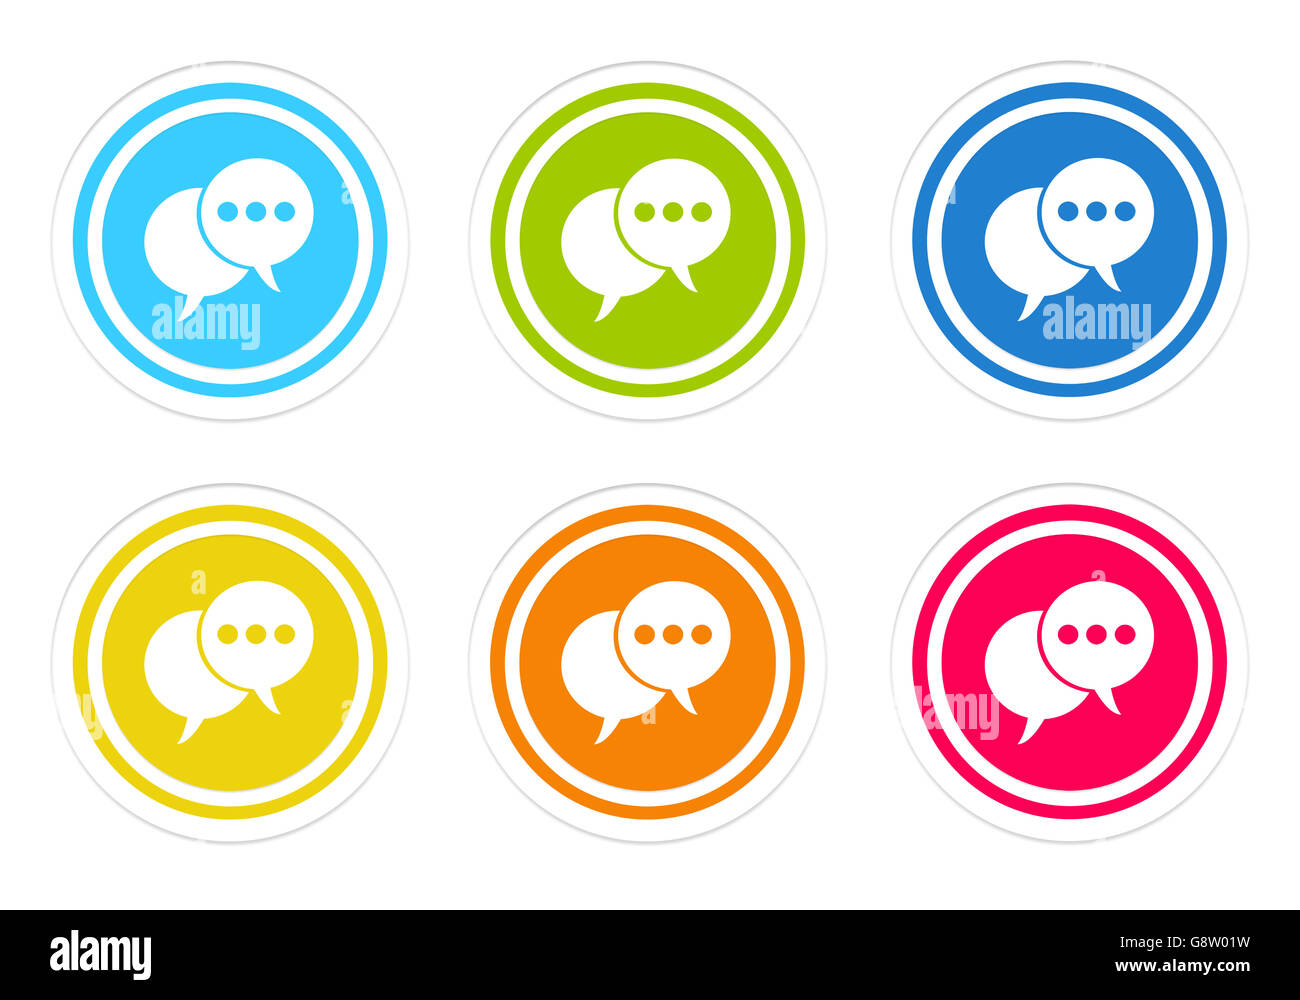 Set of rounded colorful icons with bubble speeches symbol in blue, green, yellow, red and orange colors Stock Photo